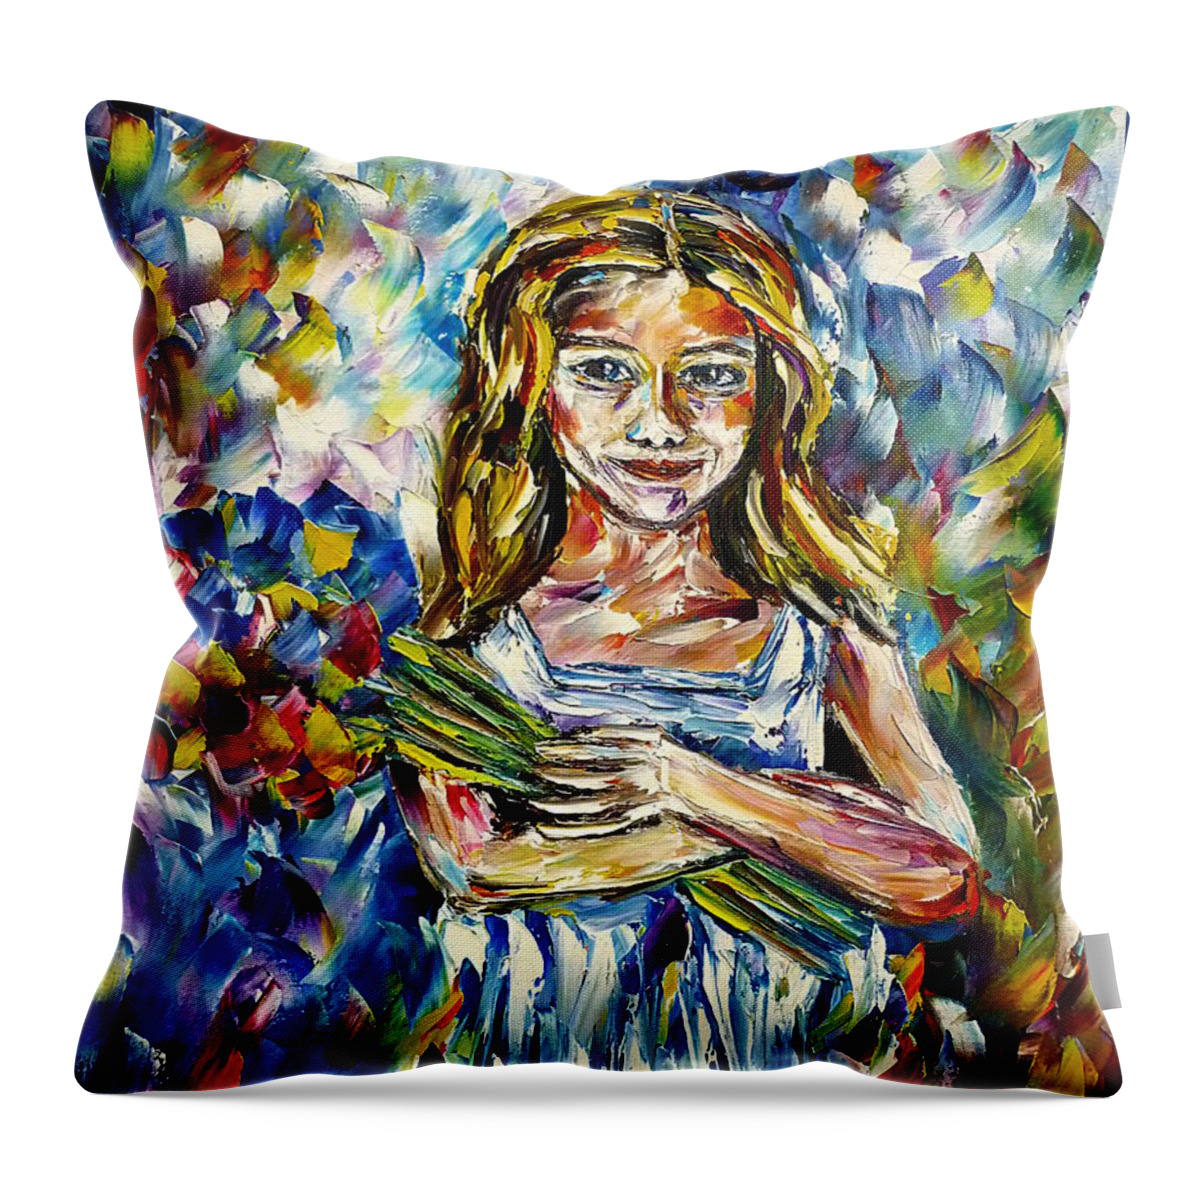 Young Girl Throw Pillow featuring the painting Girl With Flowers by Mirek Kuzniar